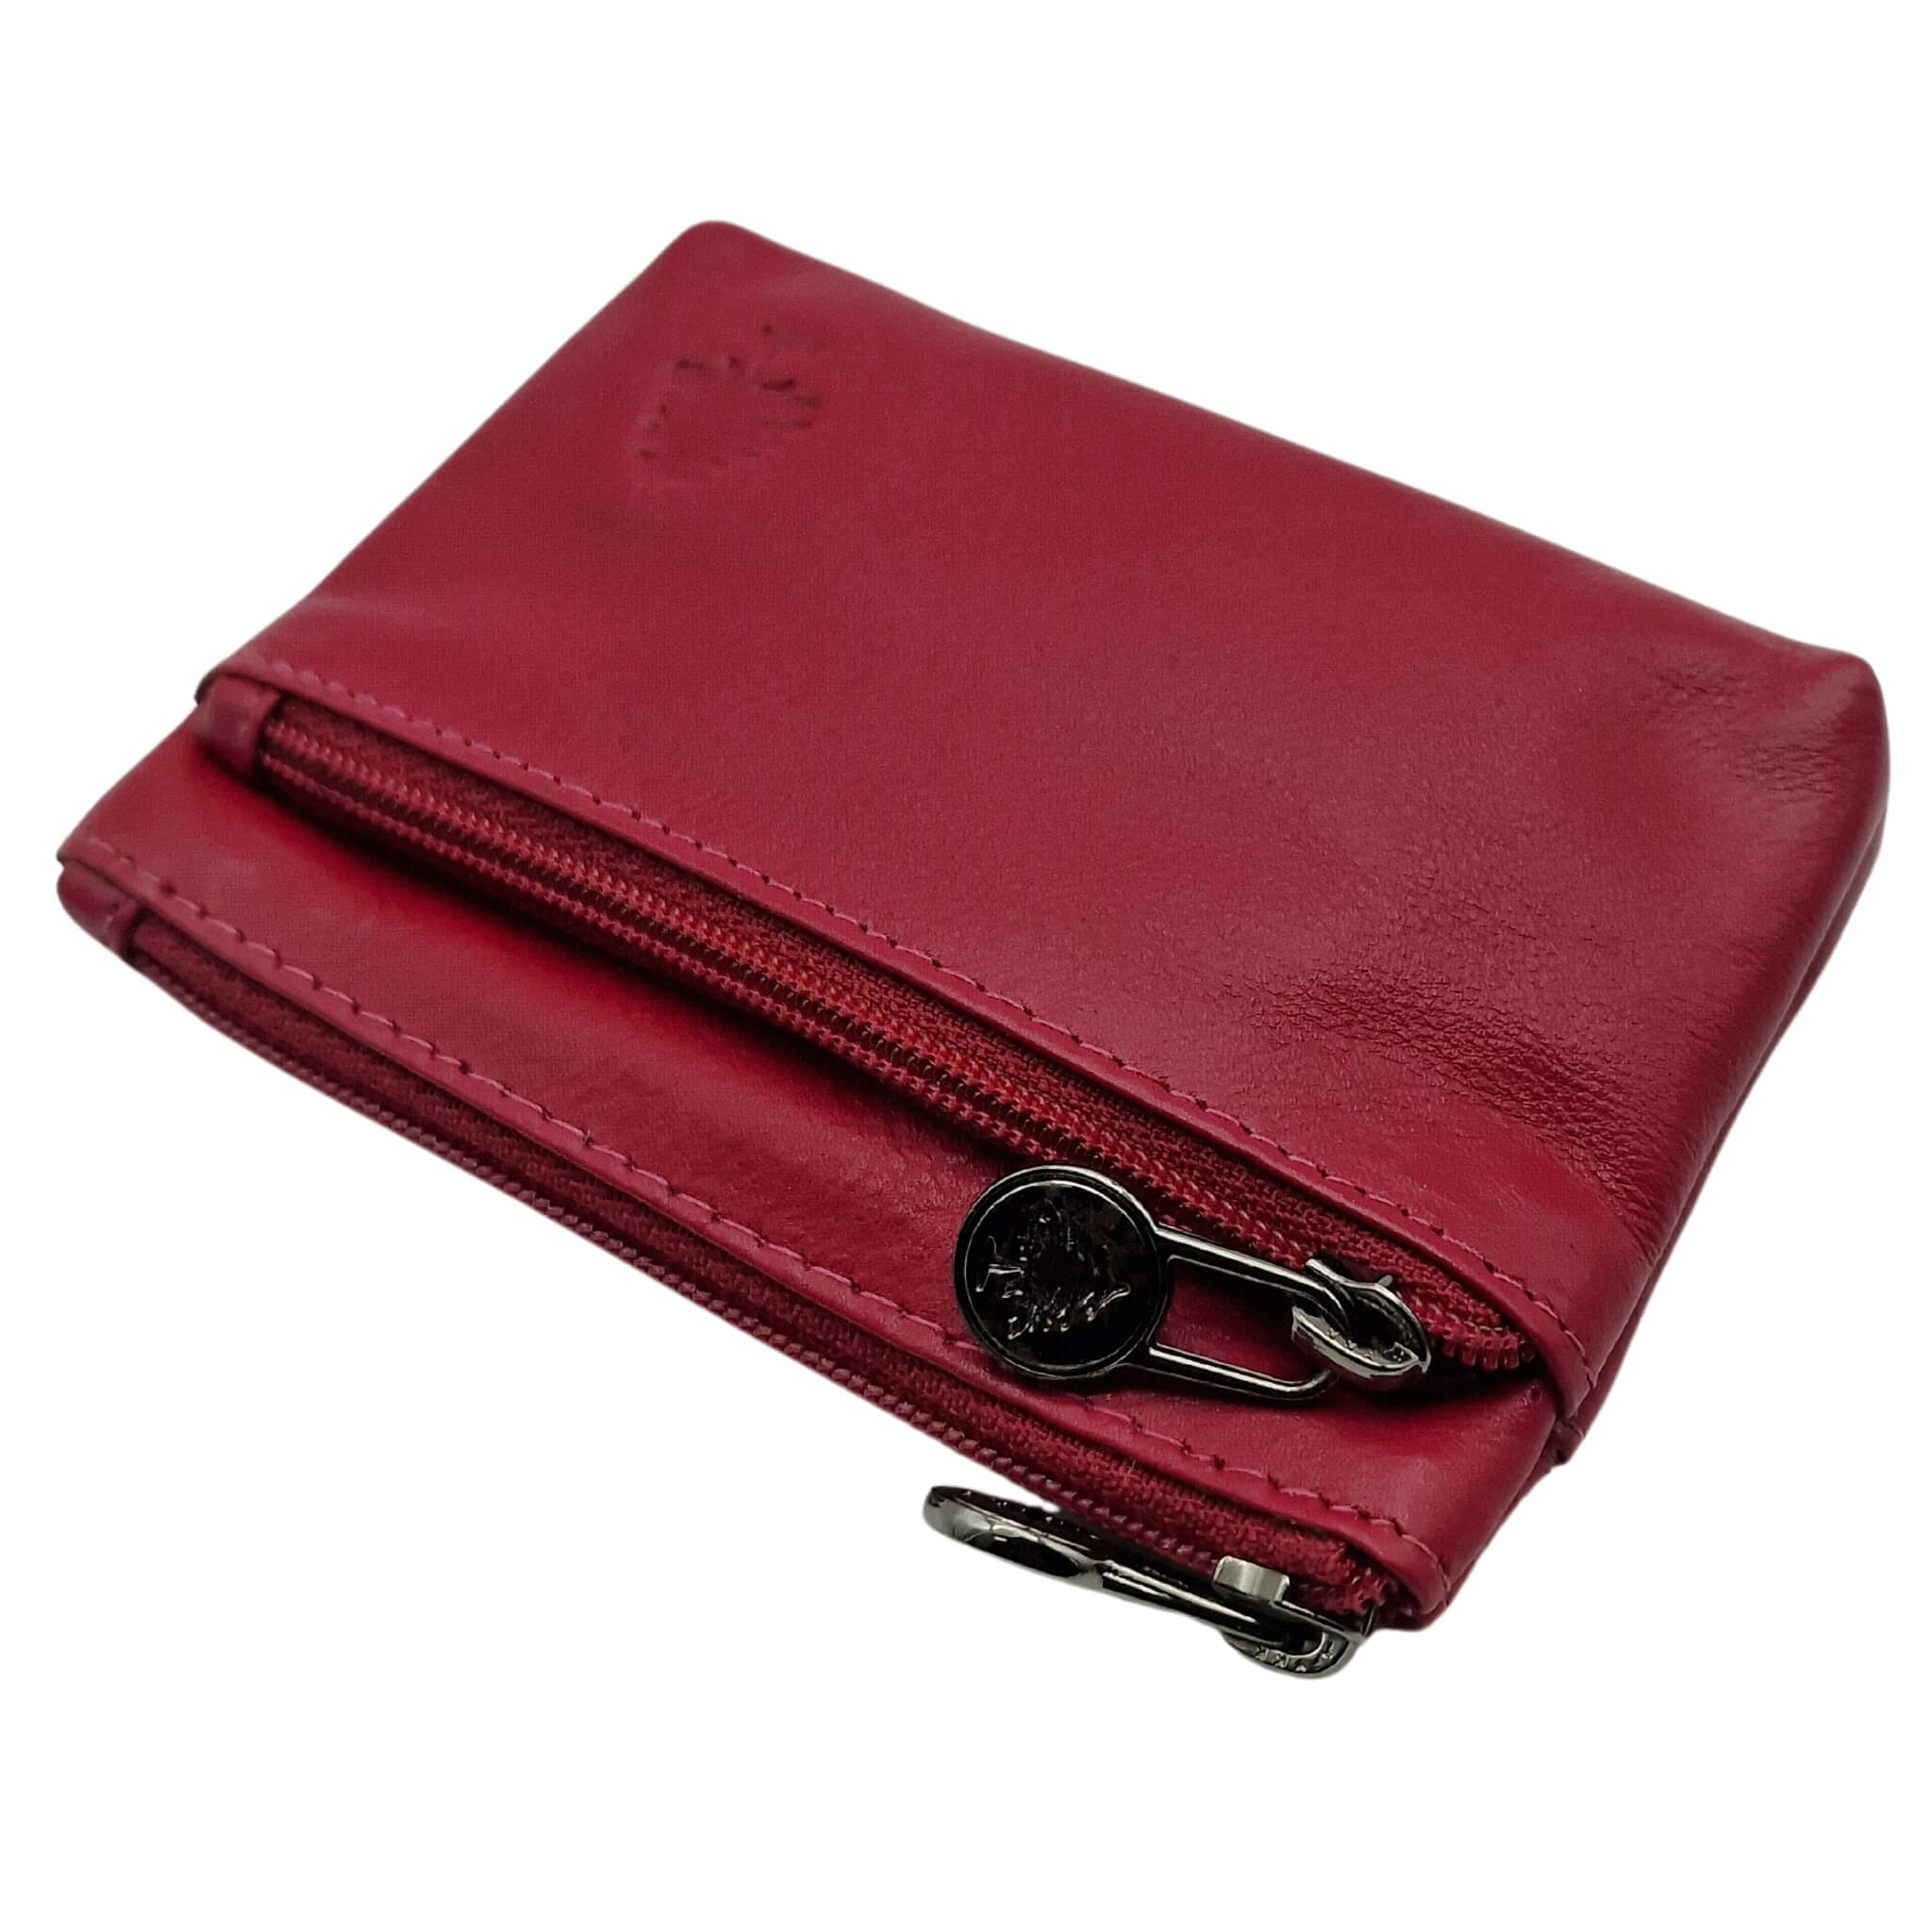 Kim Key Bag for Many Keys Leather Key Case with Bill Compartment